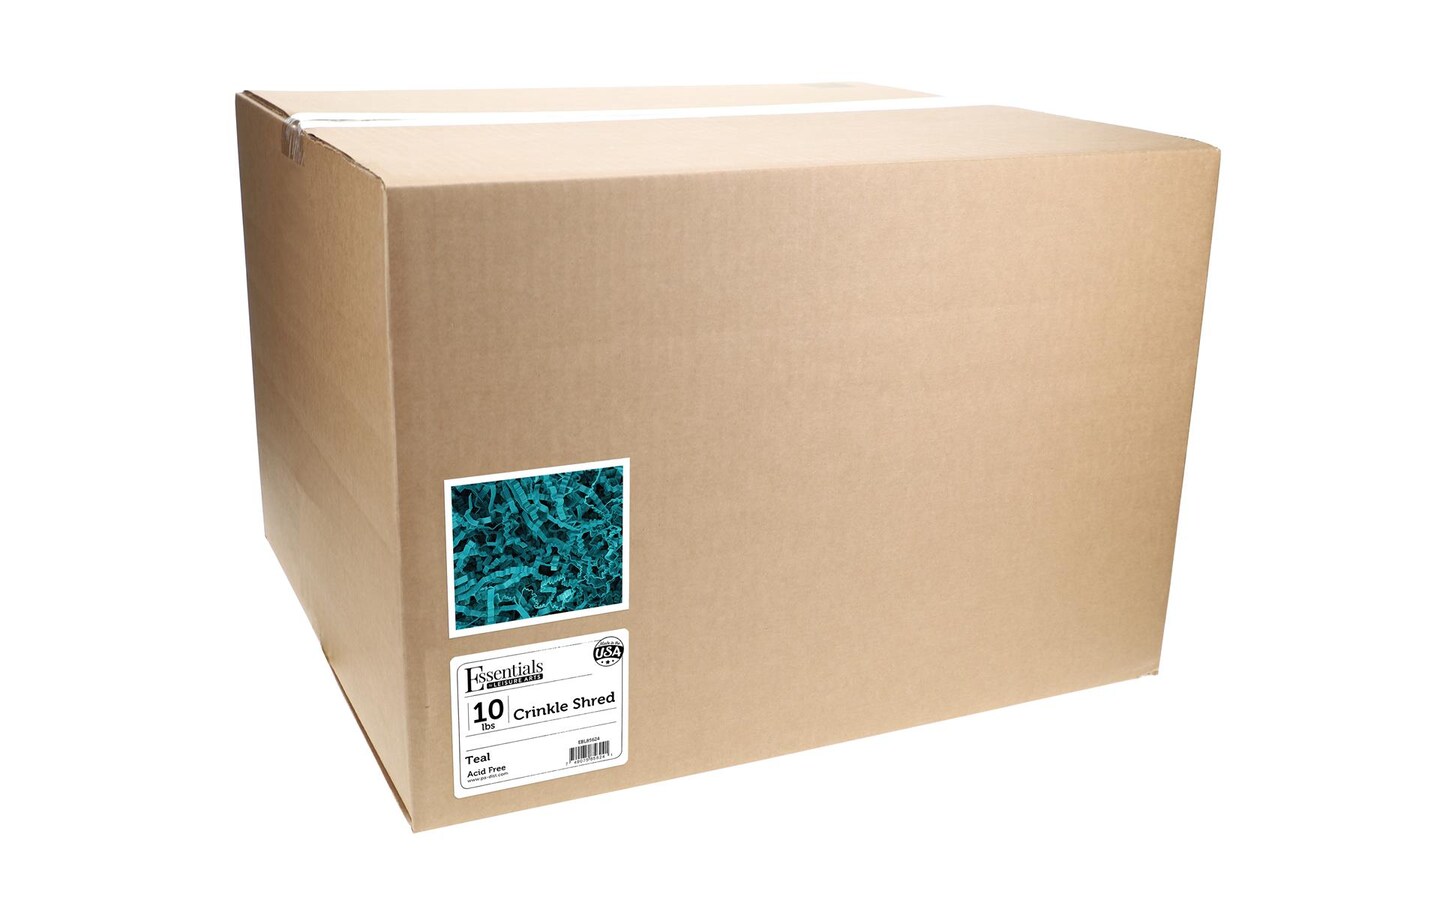 Essentials by Leisure Arts Crinkle Shred Box, Teal, 10lbs Shredded Paper Filler, Crinkle Cut Paper Shred Filler, Box Filler, Shredded Paper for Gift Box, Paper Crinkle Filler, Box Filling